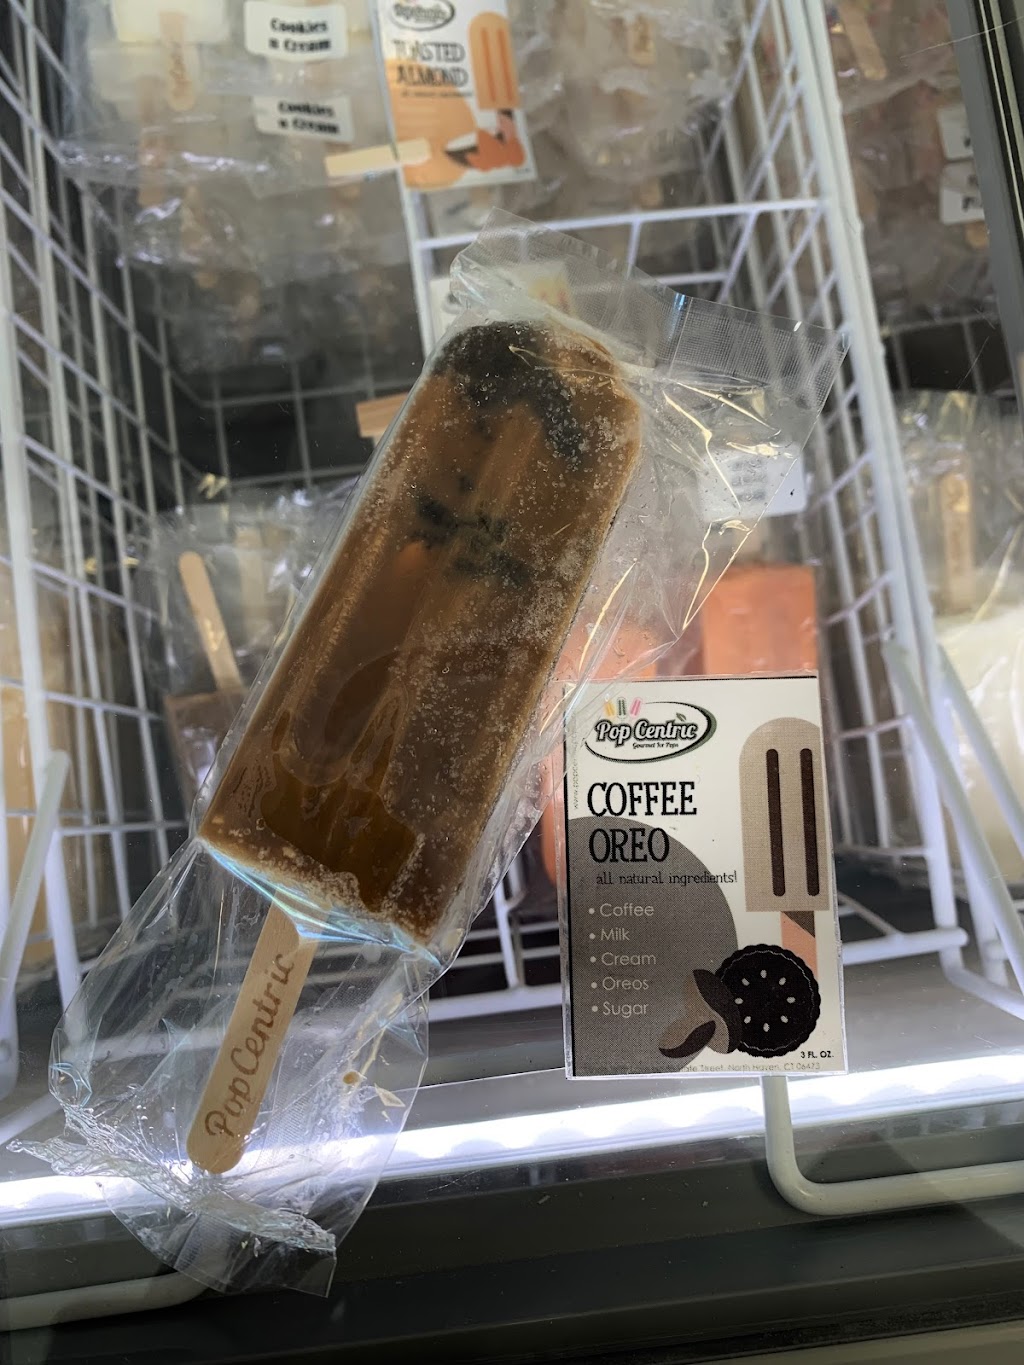 PopCentric Gourmet Ice Pops | 55 State St, North Haven, CT 06473 | Phone: (203) 492-9411